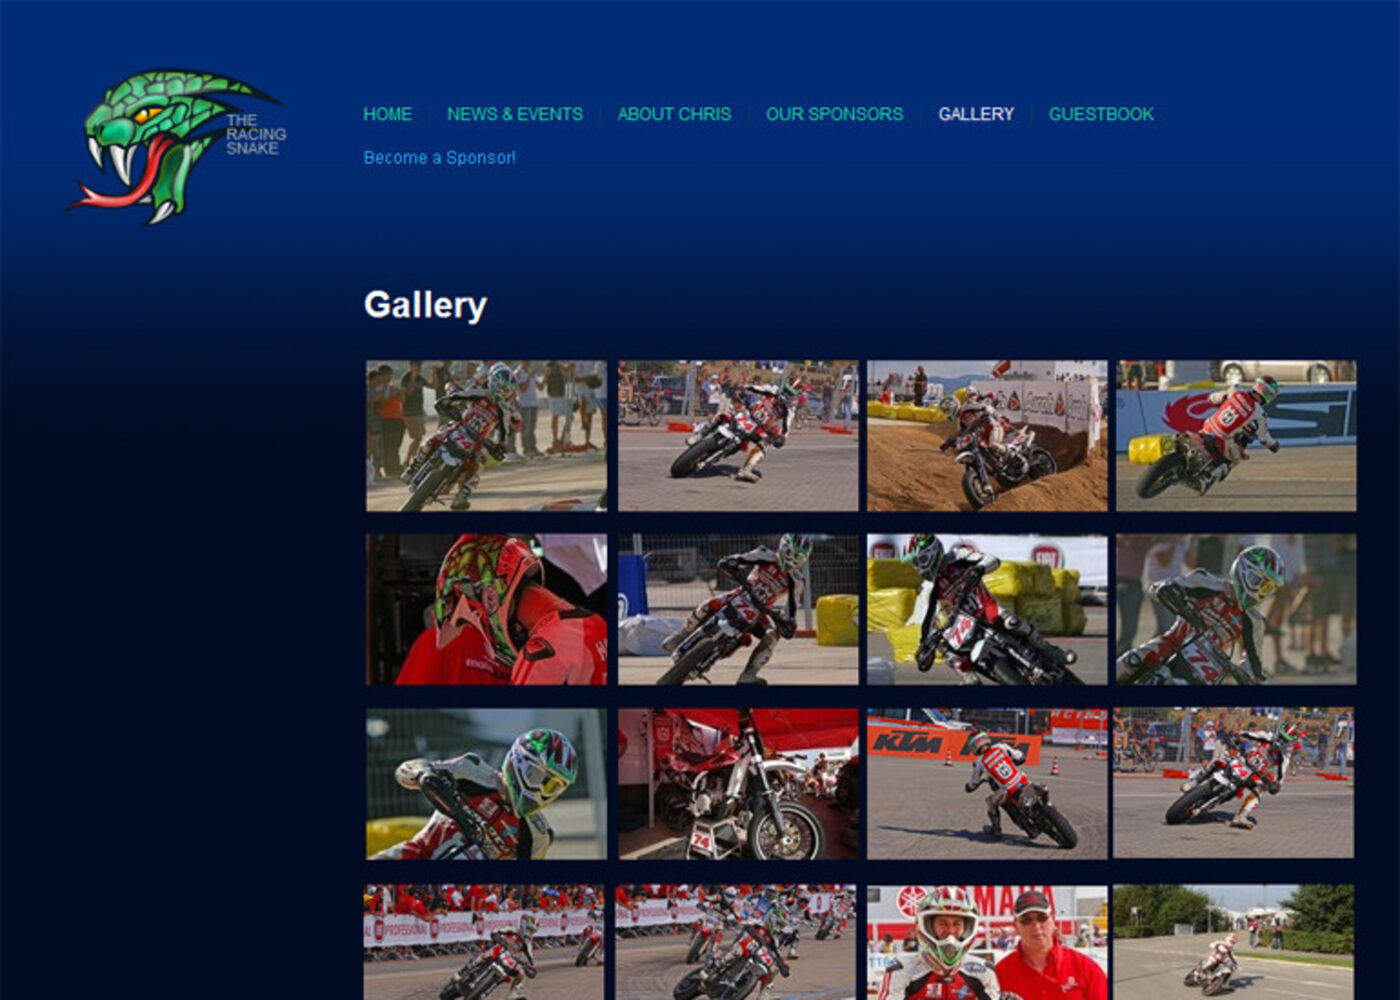 The Racing Snake Gallery